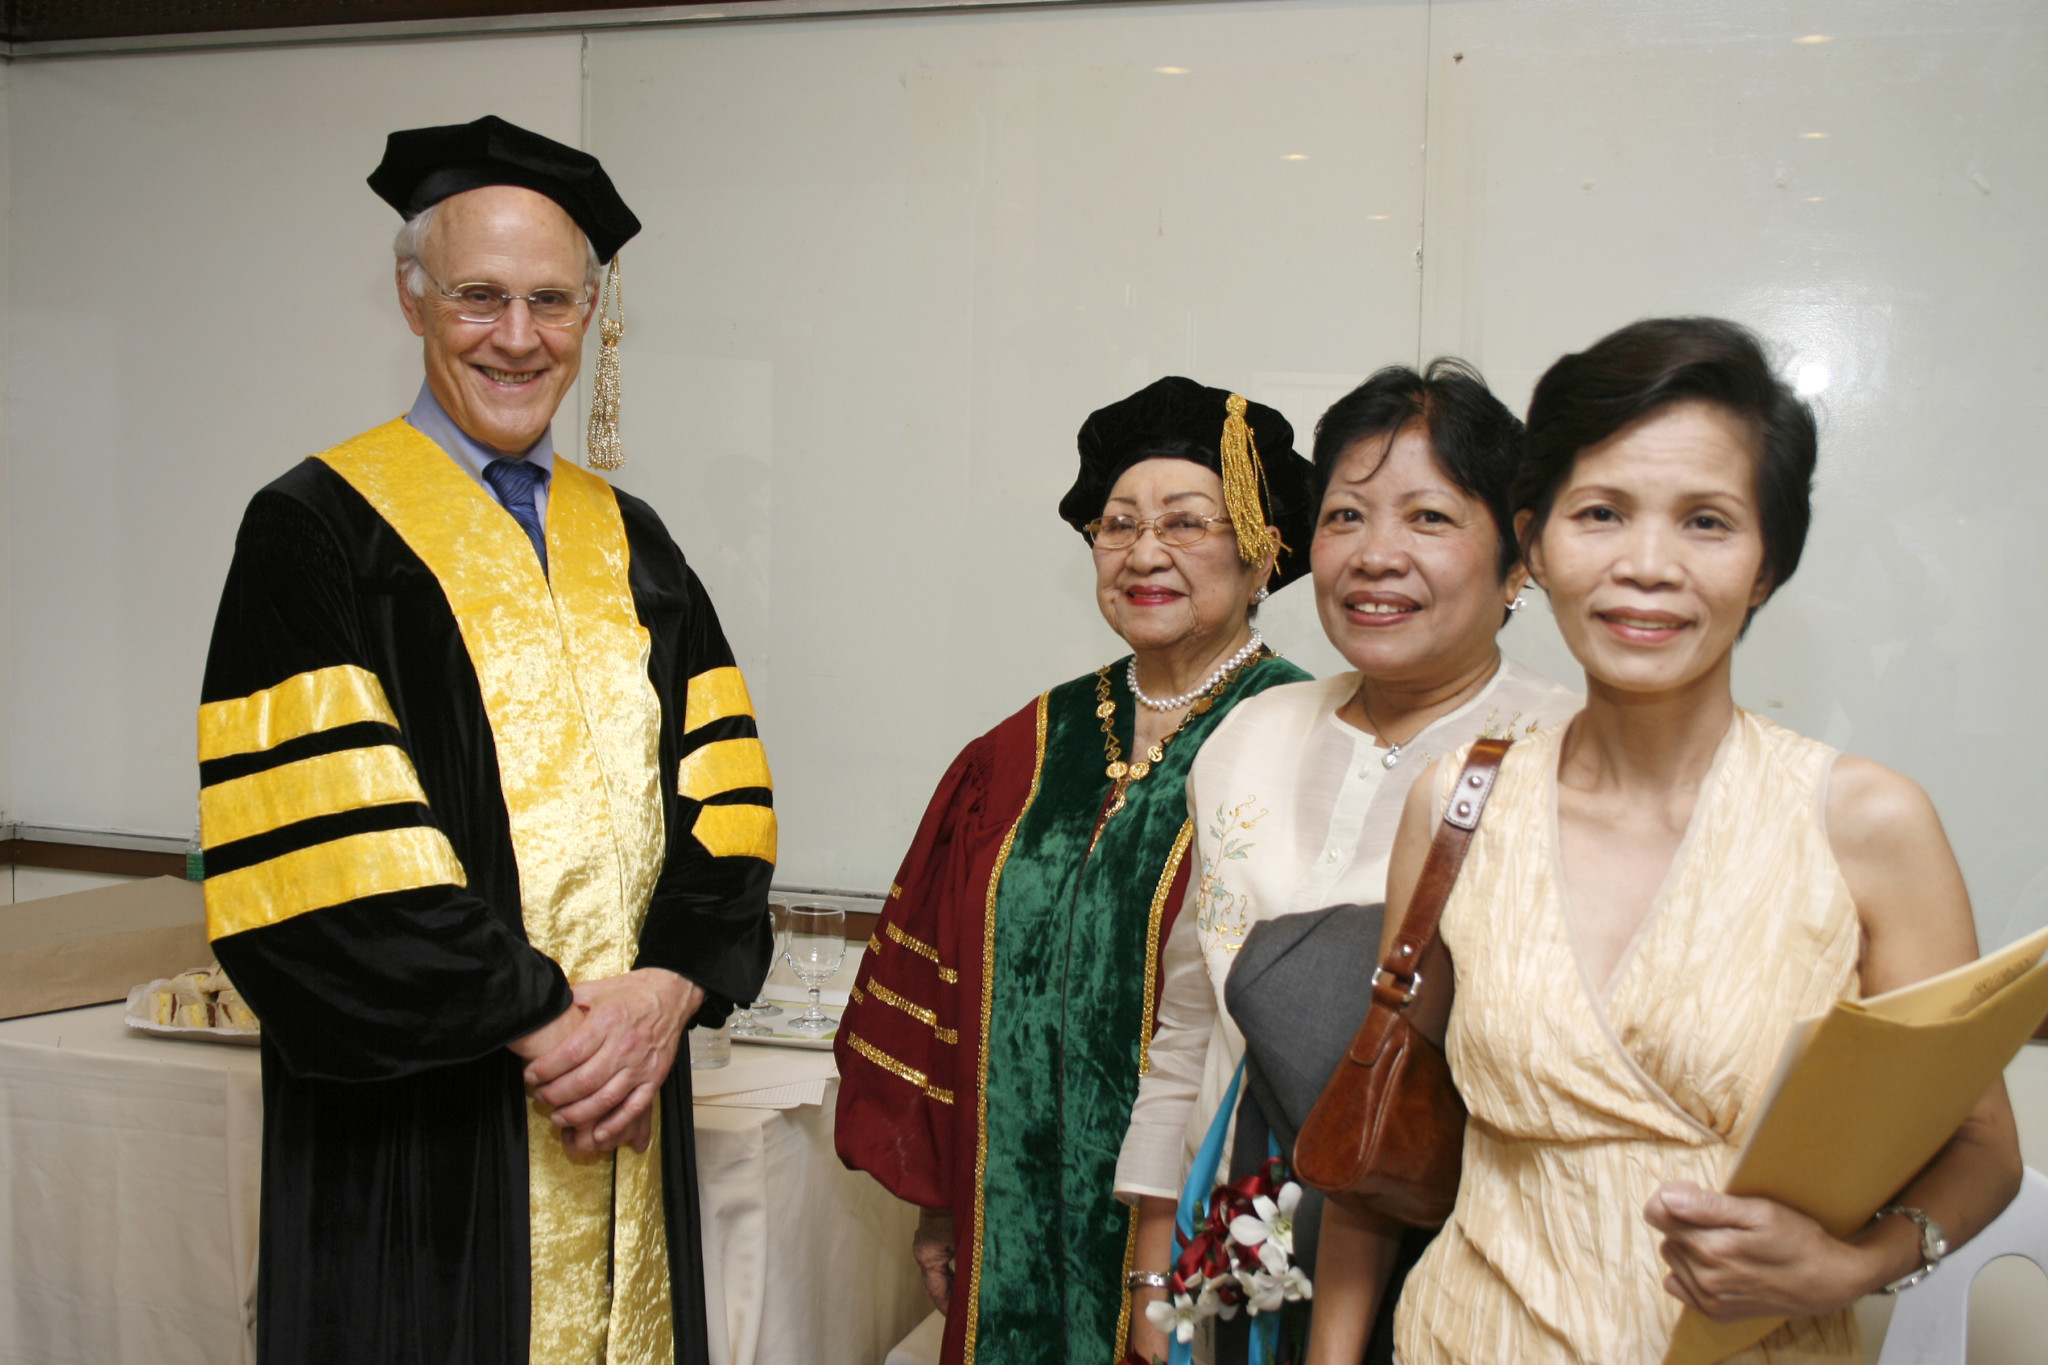 Physics Nobel Laureate Prof. David J. Gross being awarded an Honorary Doctorate Degree in Manila